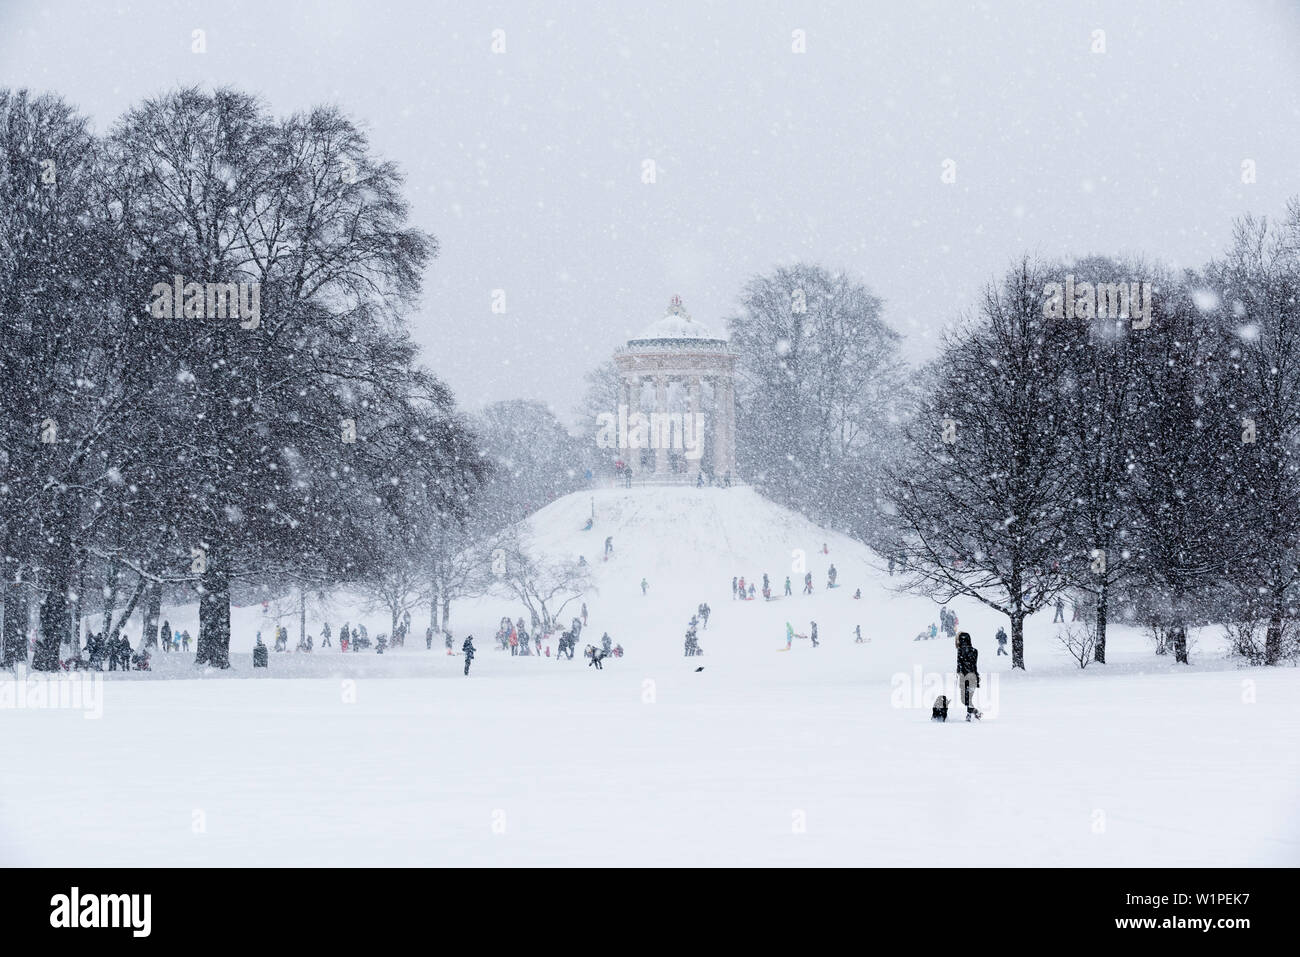 Sledging during Snow Fall at Monopteros, English Garden, Munich, Germany Stock Photo